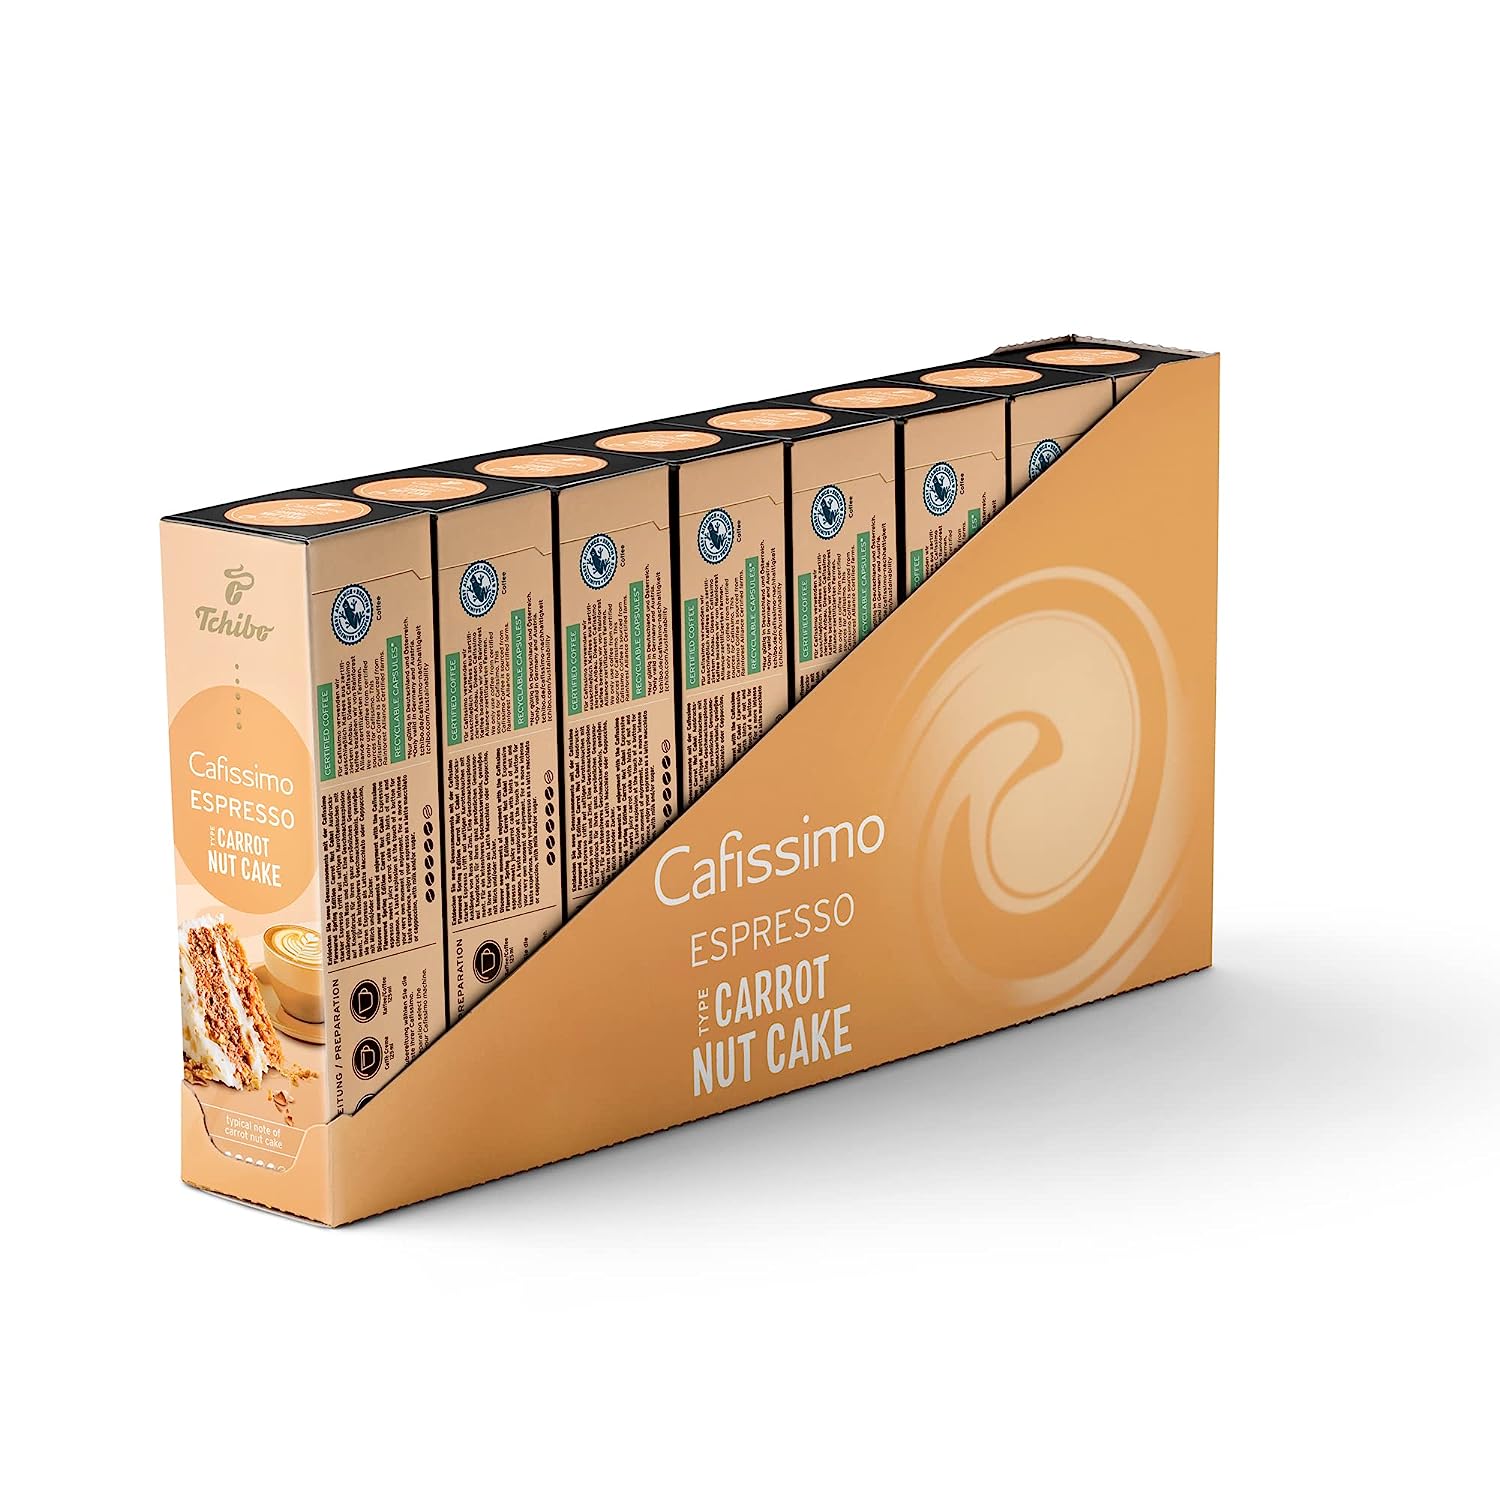 Tchibo Cafissimo storage box Espresso Carrot nut Cake capsules, 80 pieces-8x 10 capsules (espresso, aromatic with carrot nuts taste), sustainable & fair trade, Limited Edition